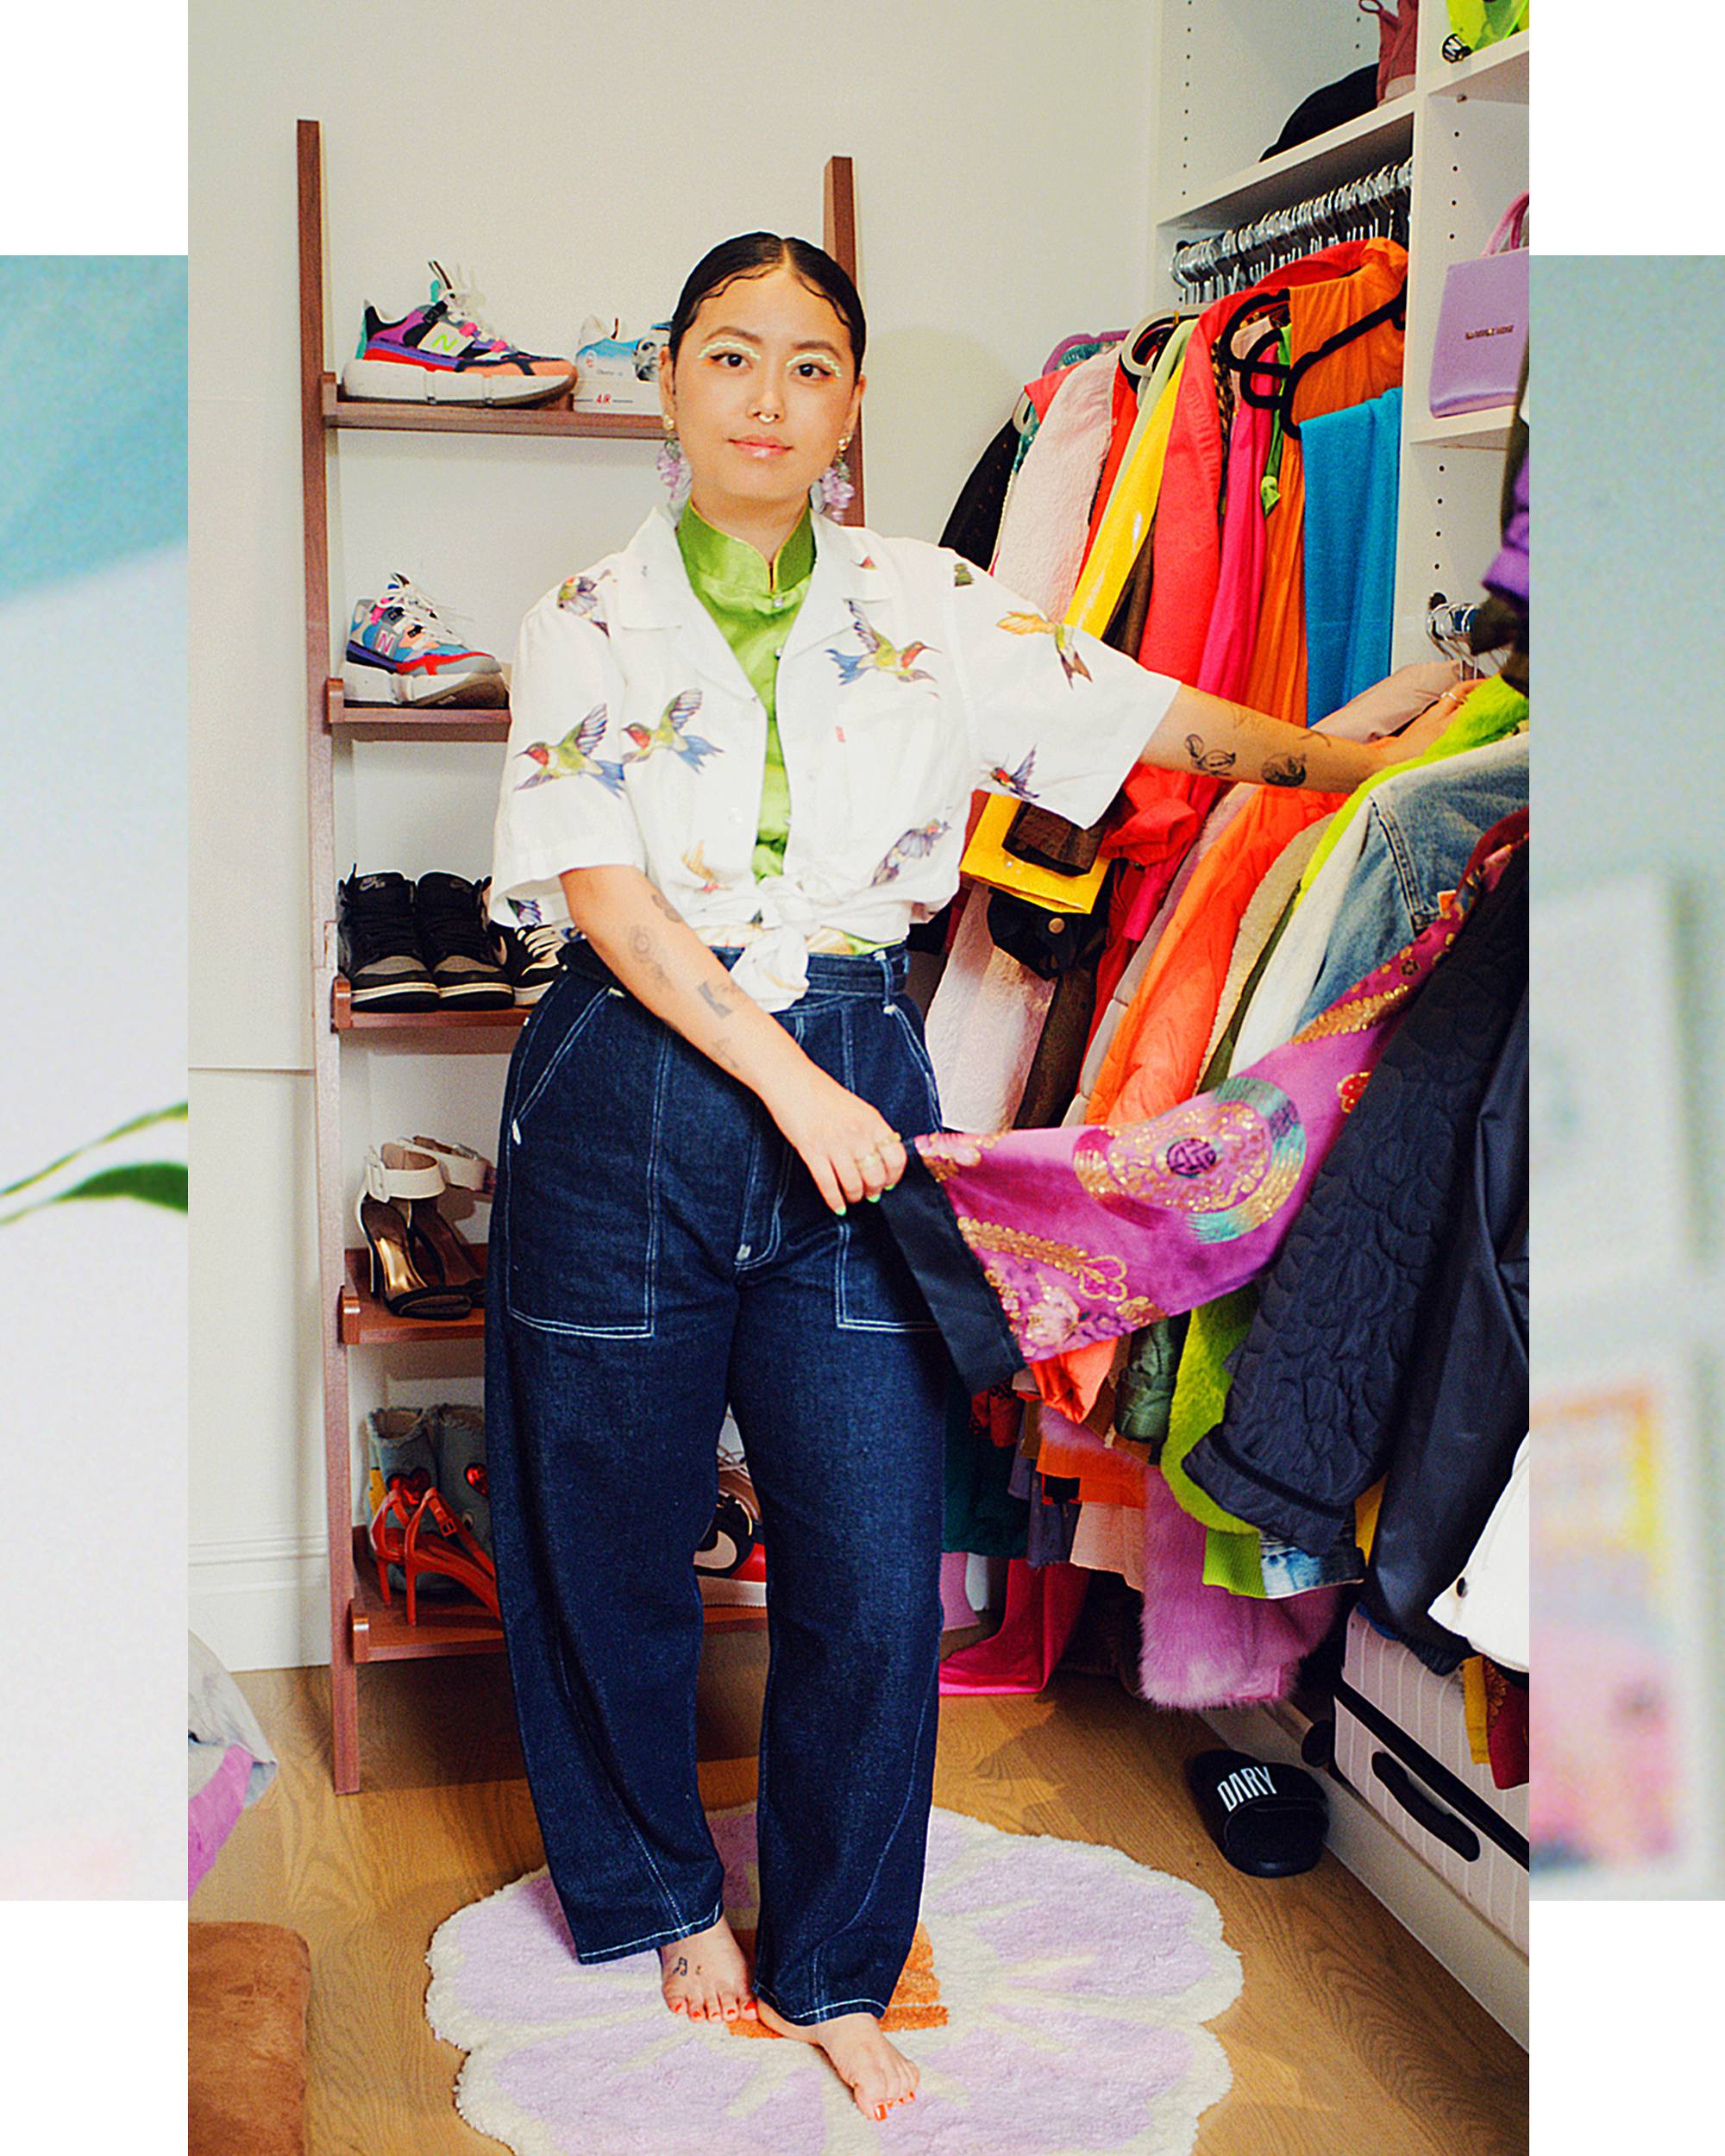 Jezz Chung in her closet looking through clothing, styled in high wasted Levis denim jeans in dark blue